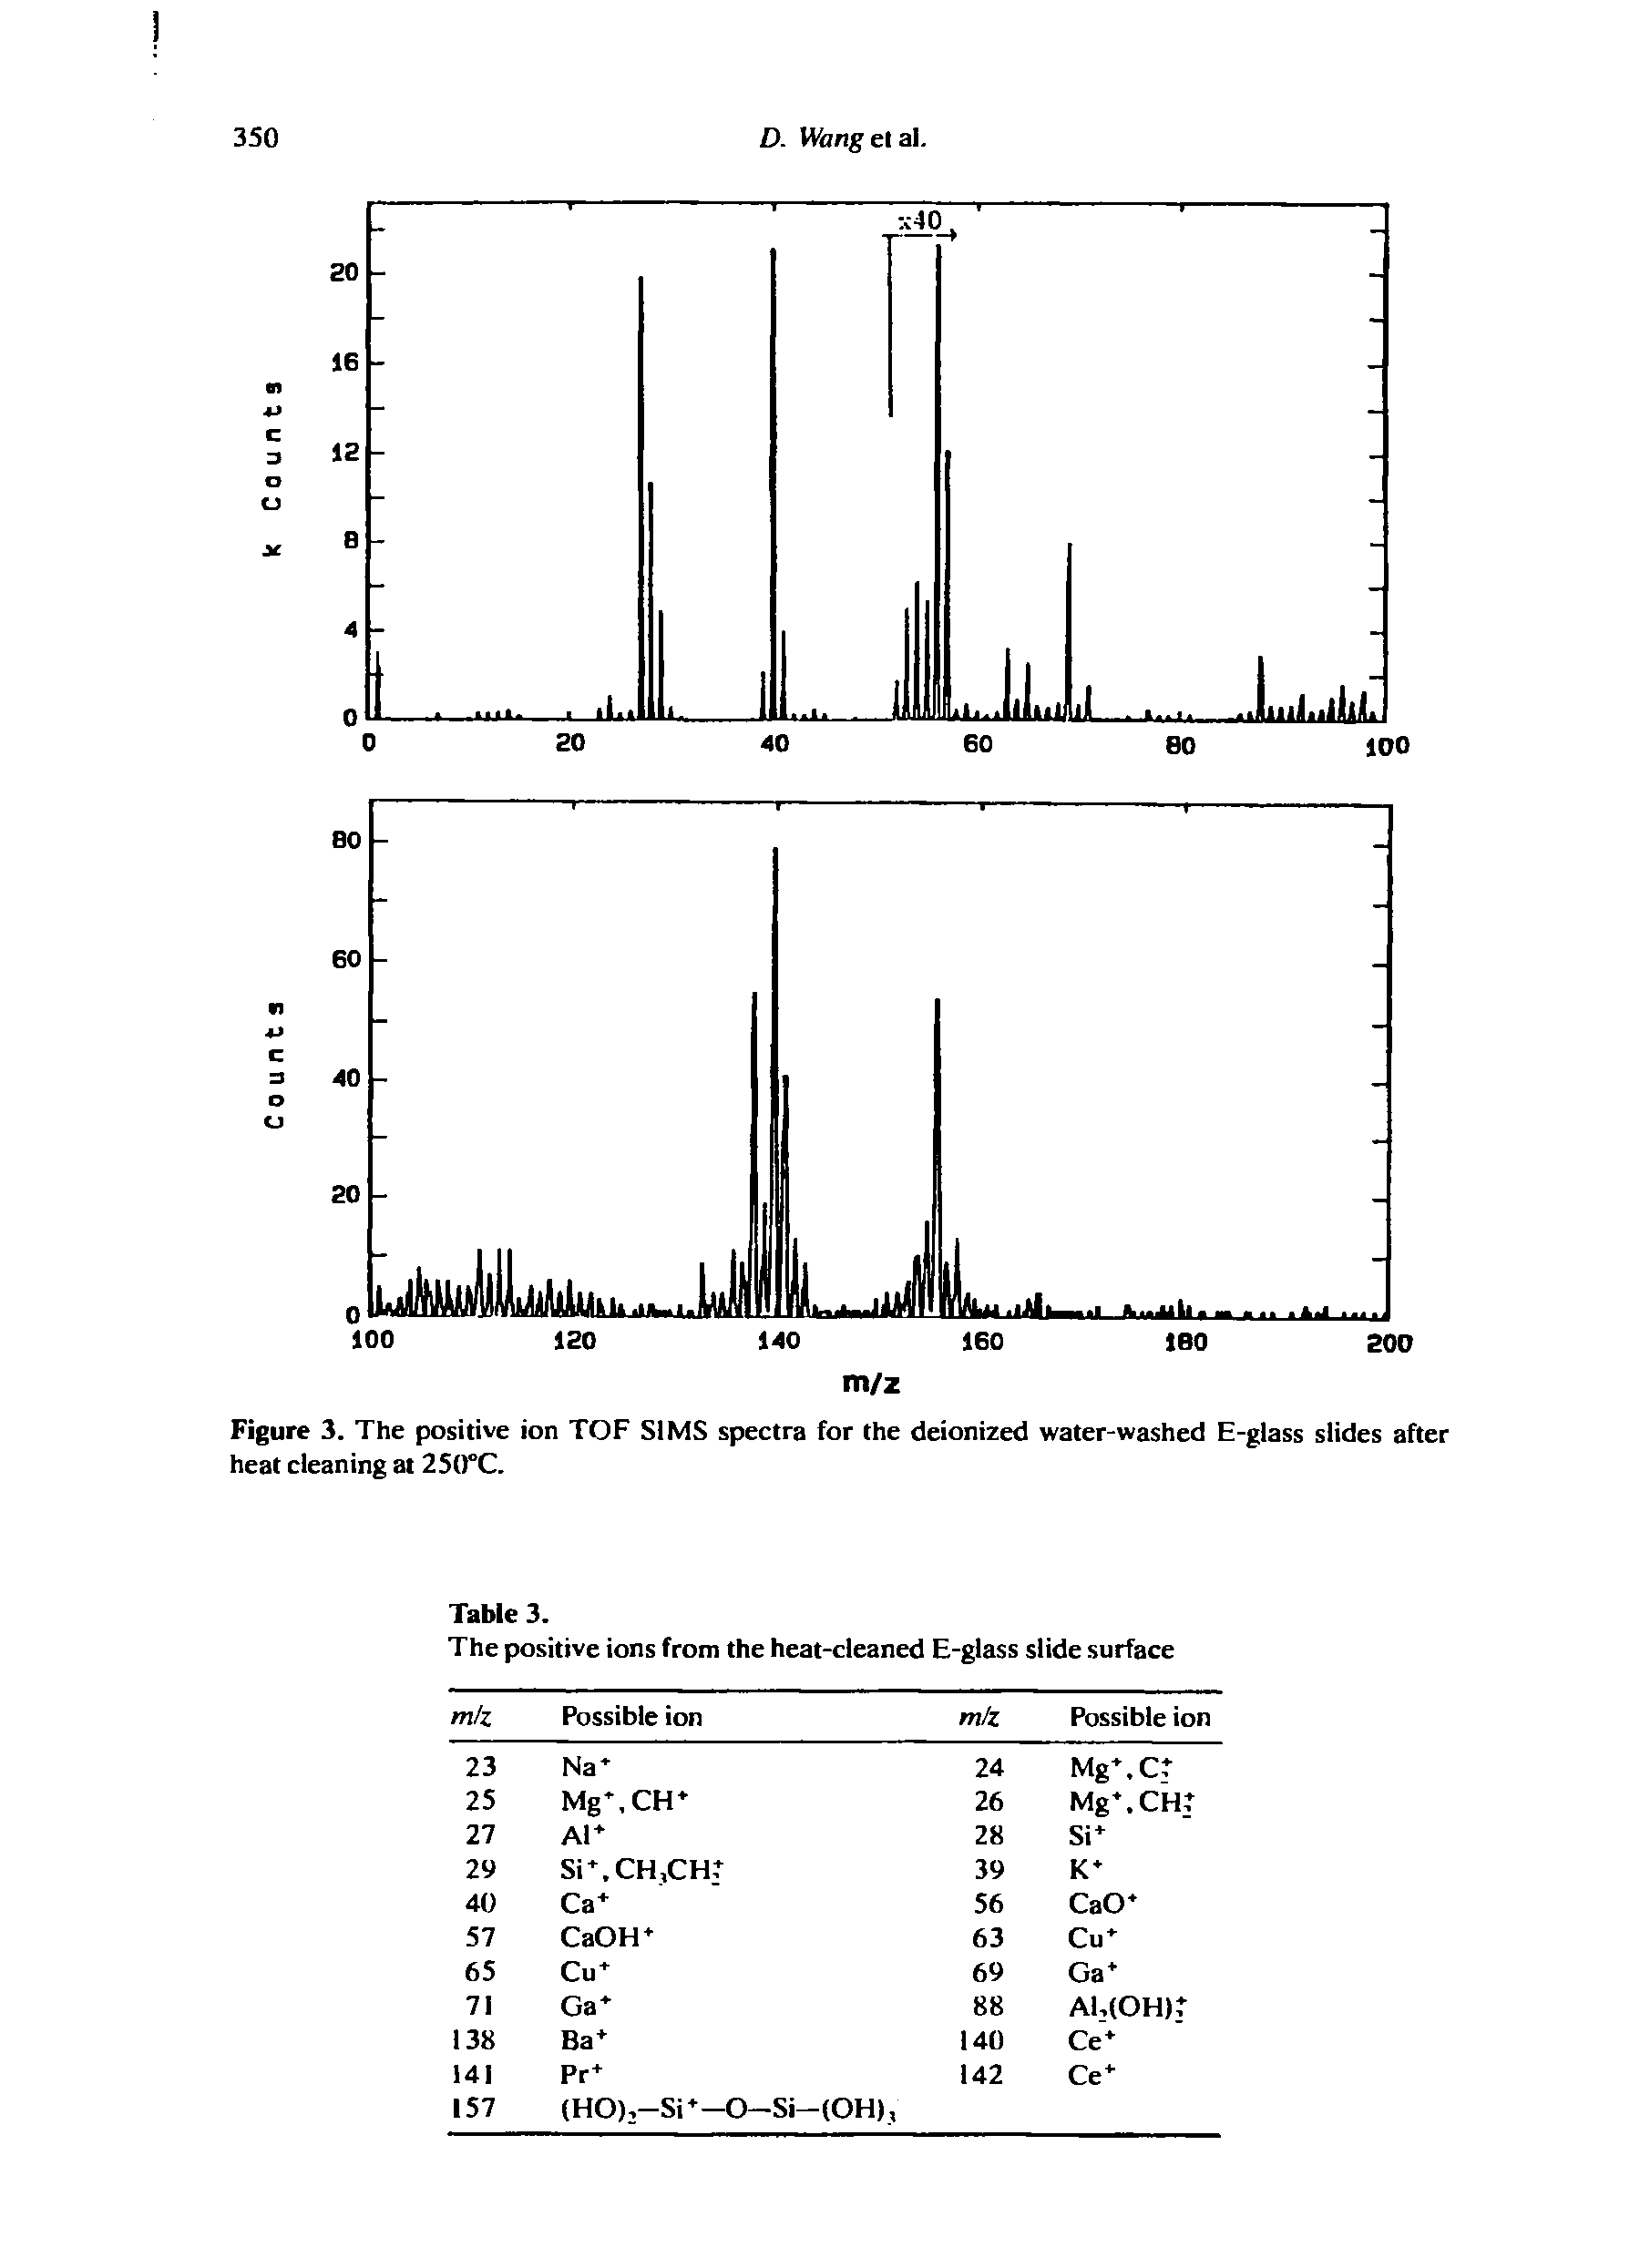 Figure 3. The positive ion TOF SIMS spectra for the deionized water-washed E-glass slides after heat cleaning at 250°C.